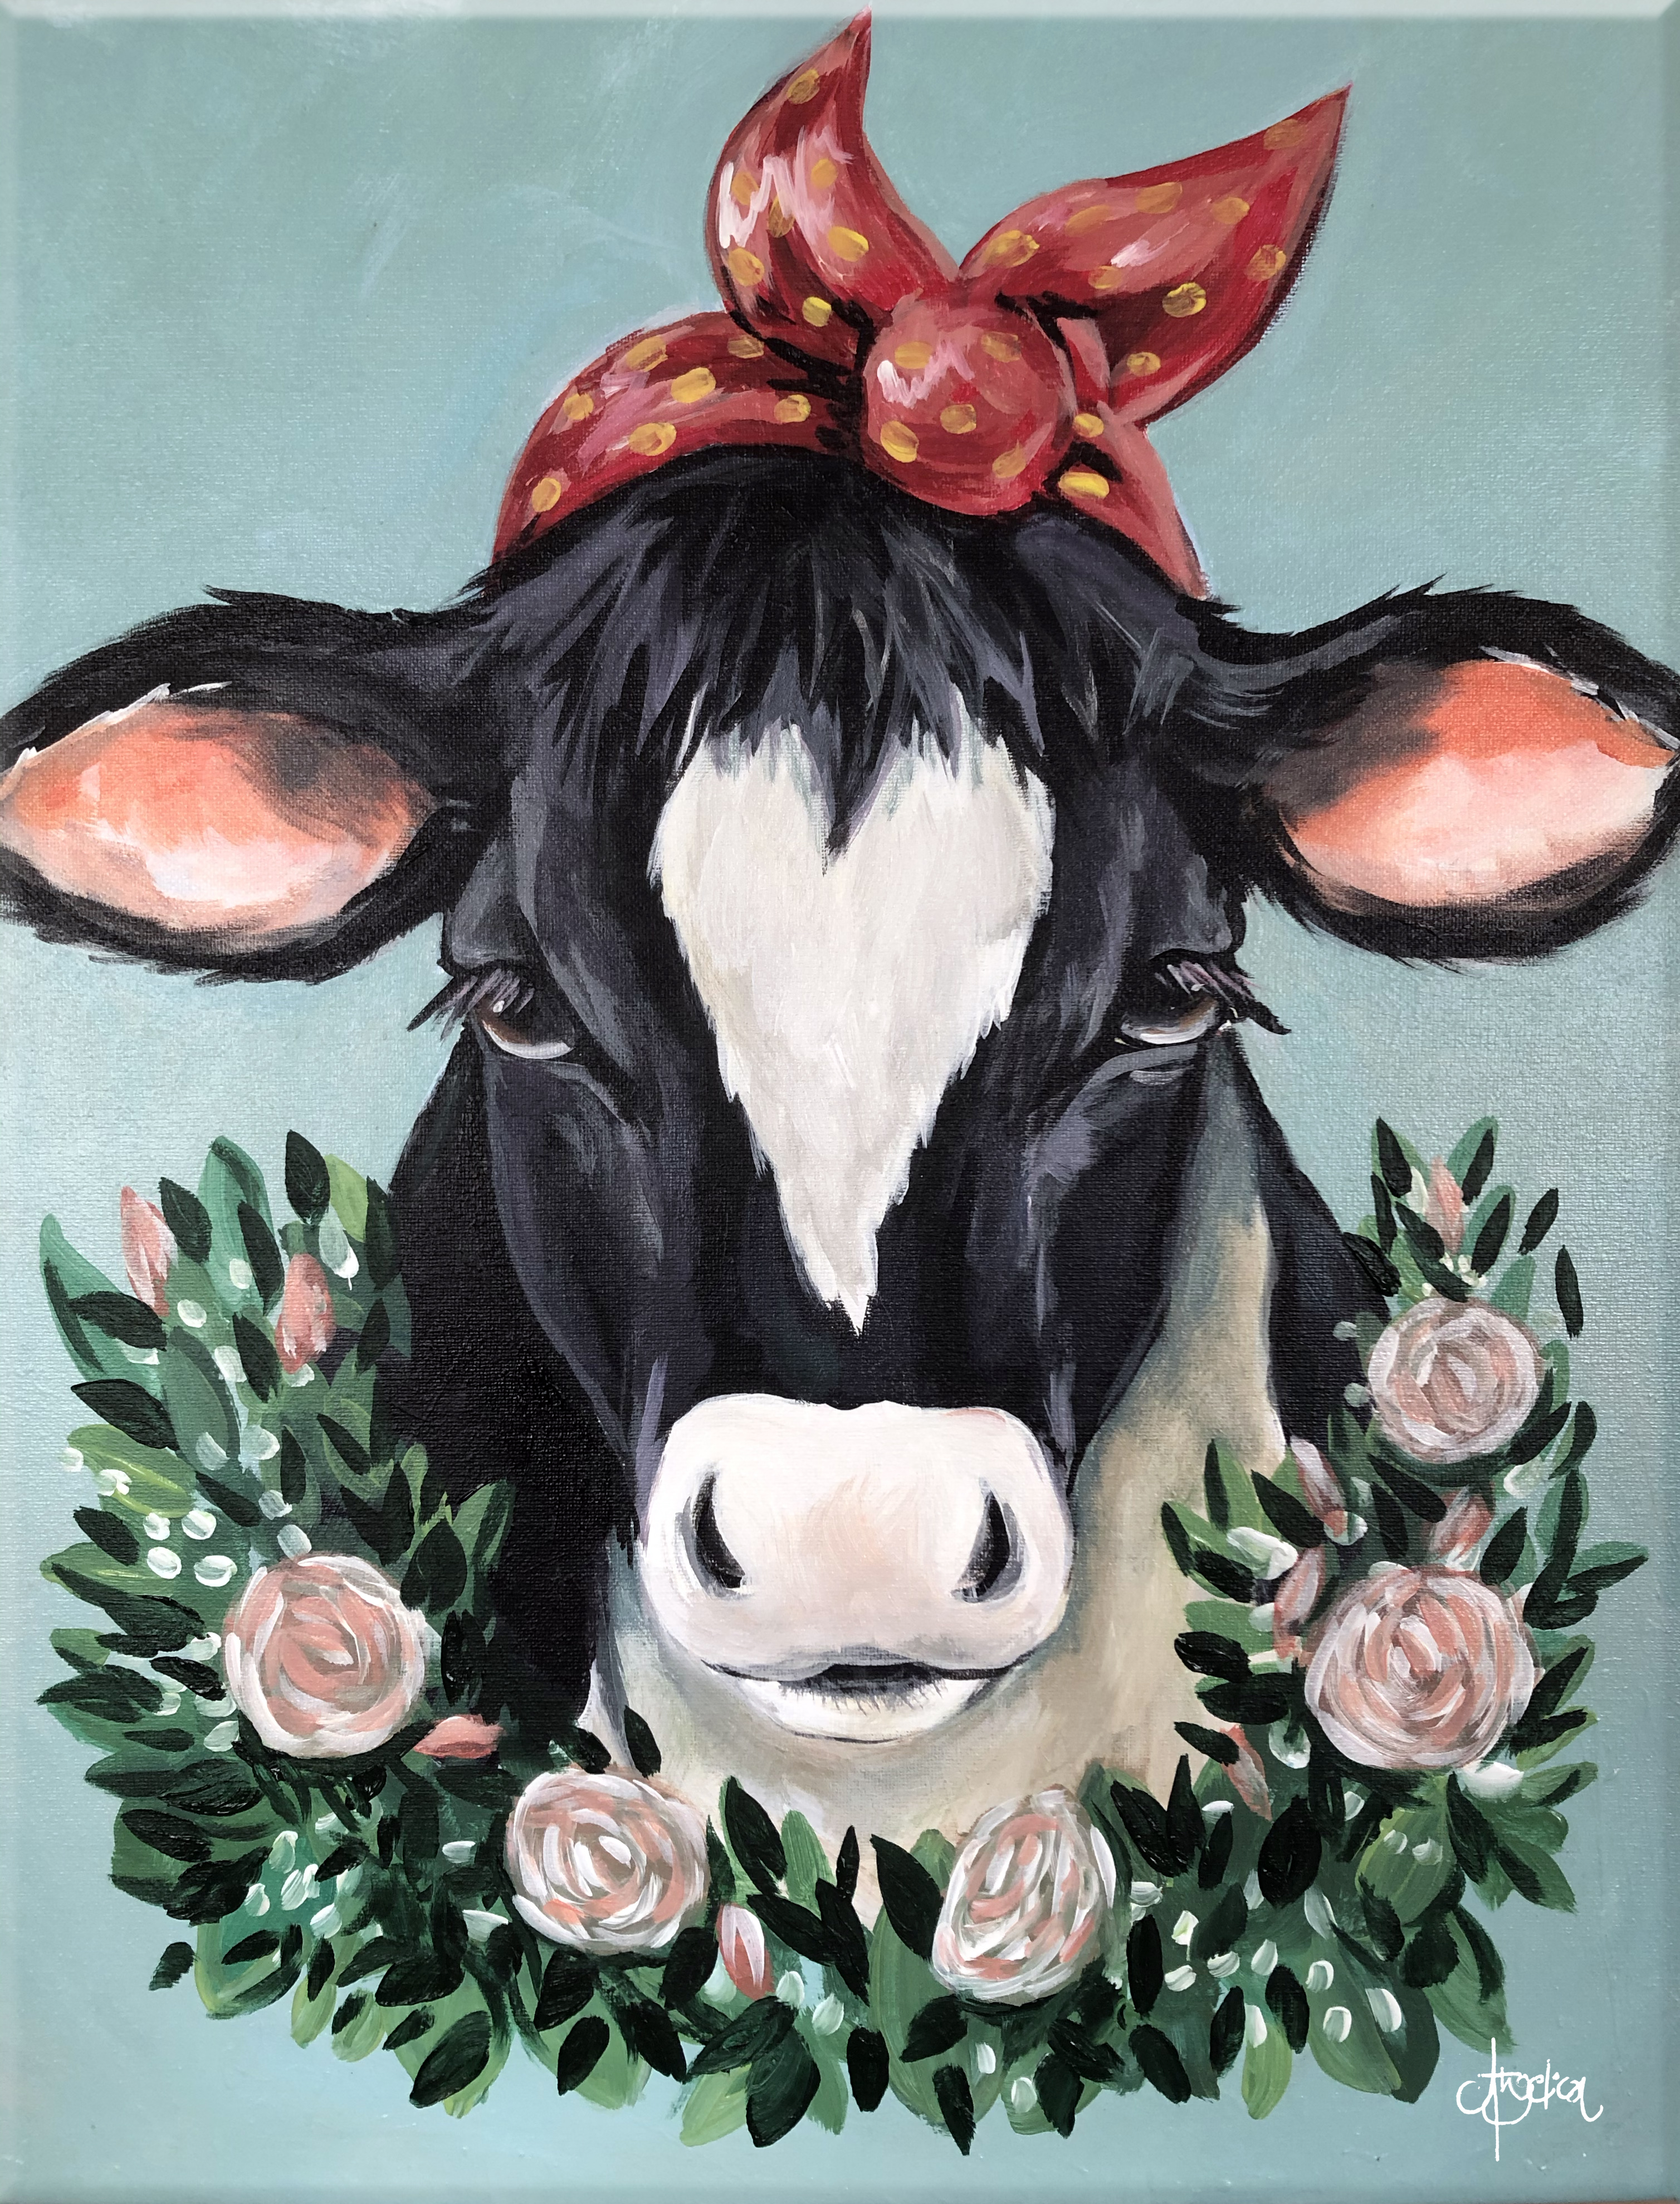 VIRTUAL CLASS! "Betsy the Cow" Pick-Up Paint Kits between 1:00-3:00pm. Join us LIVE on Zoom at 7:00pm!